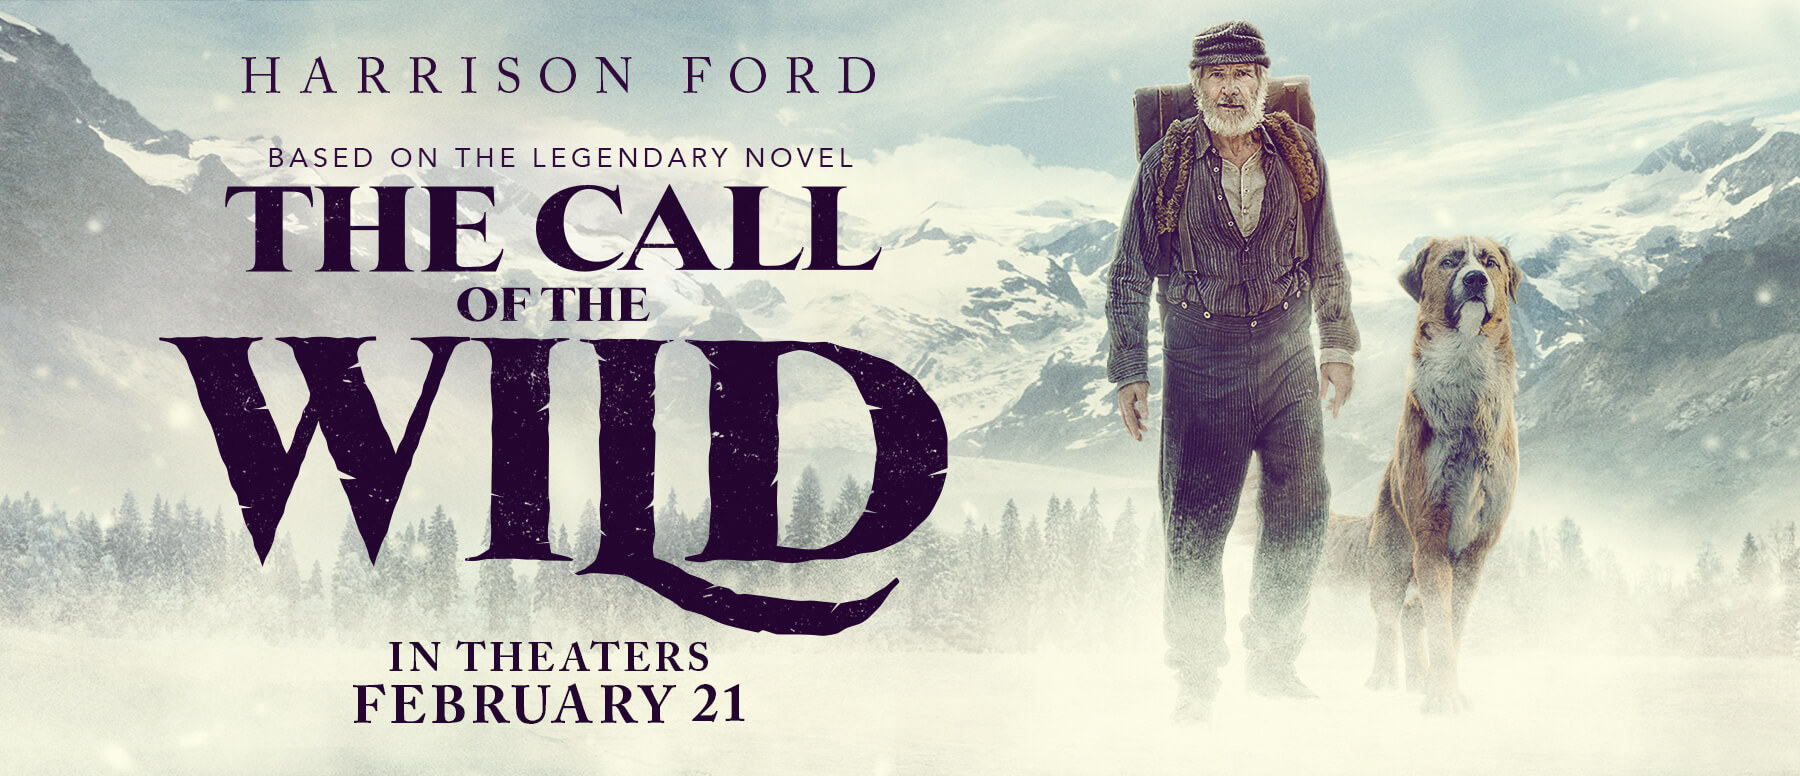 the call of wild movie review